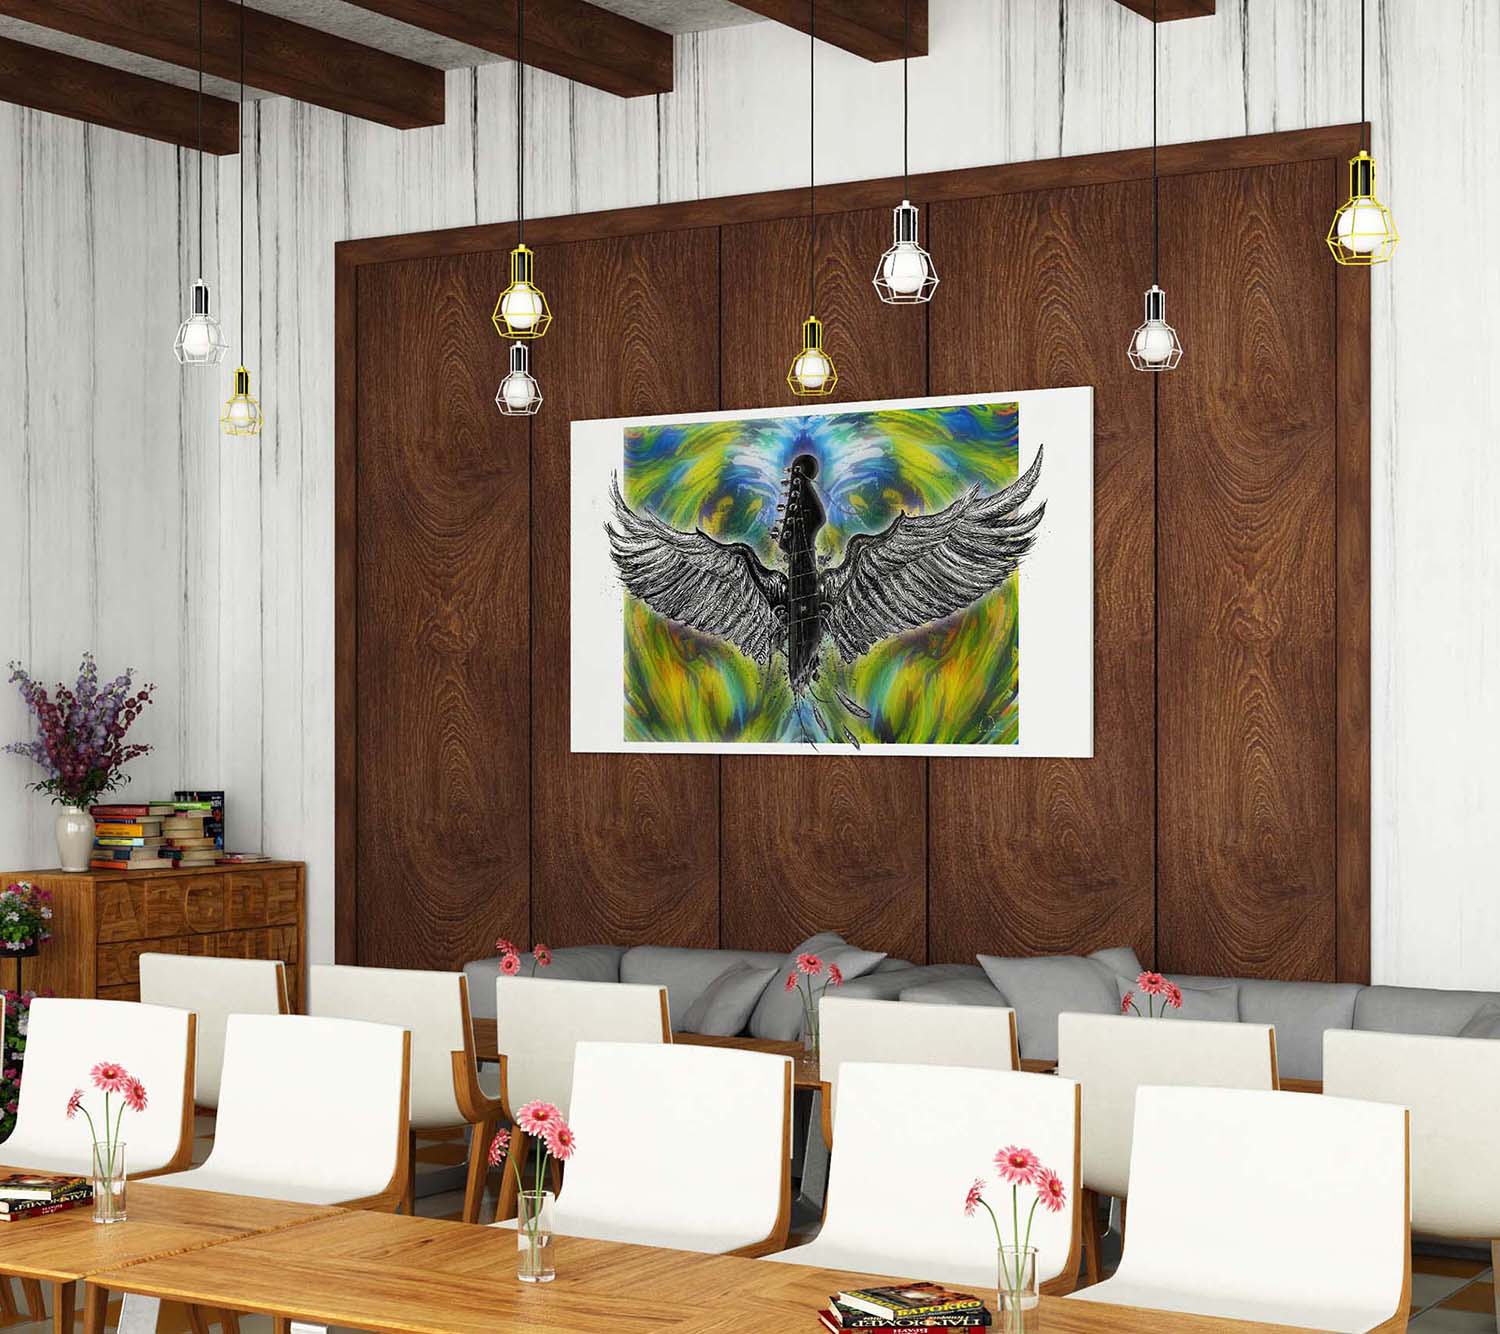 Music Breaks Free mixed media art by Doug LaRue on a party room wood panel wall